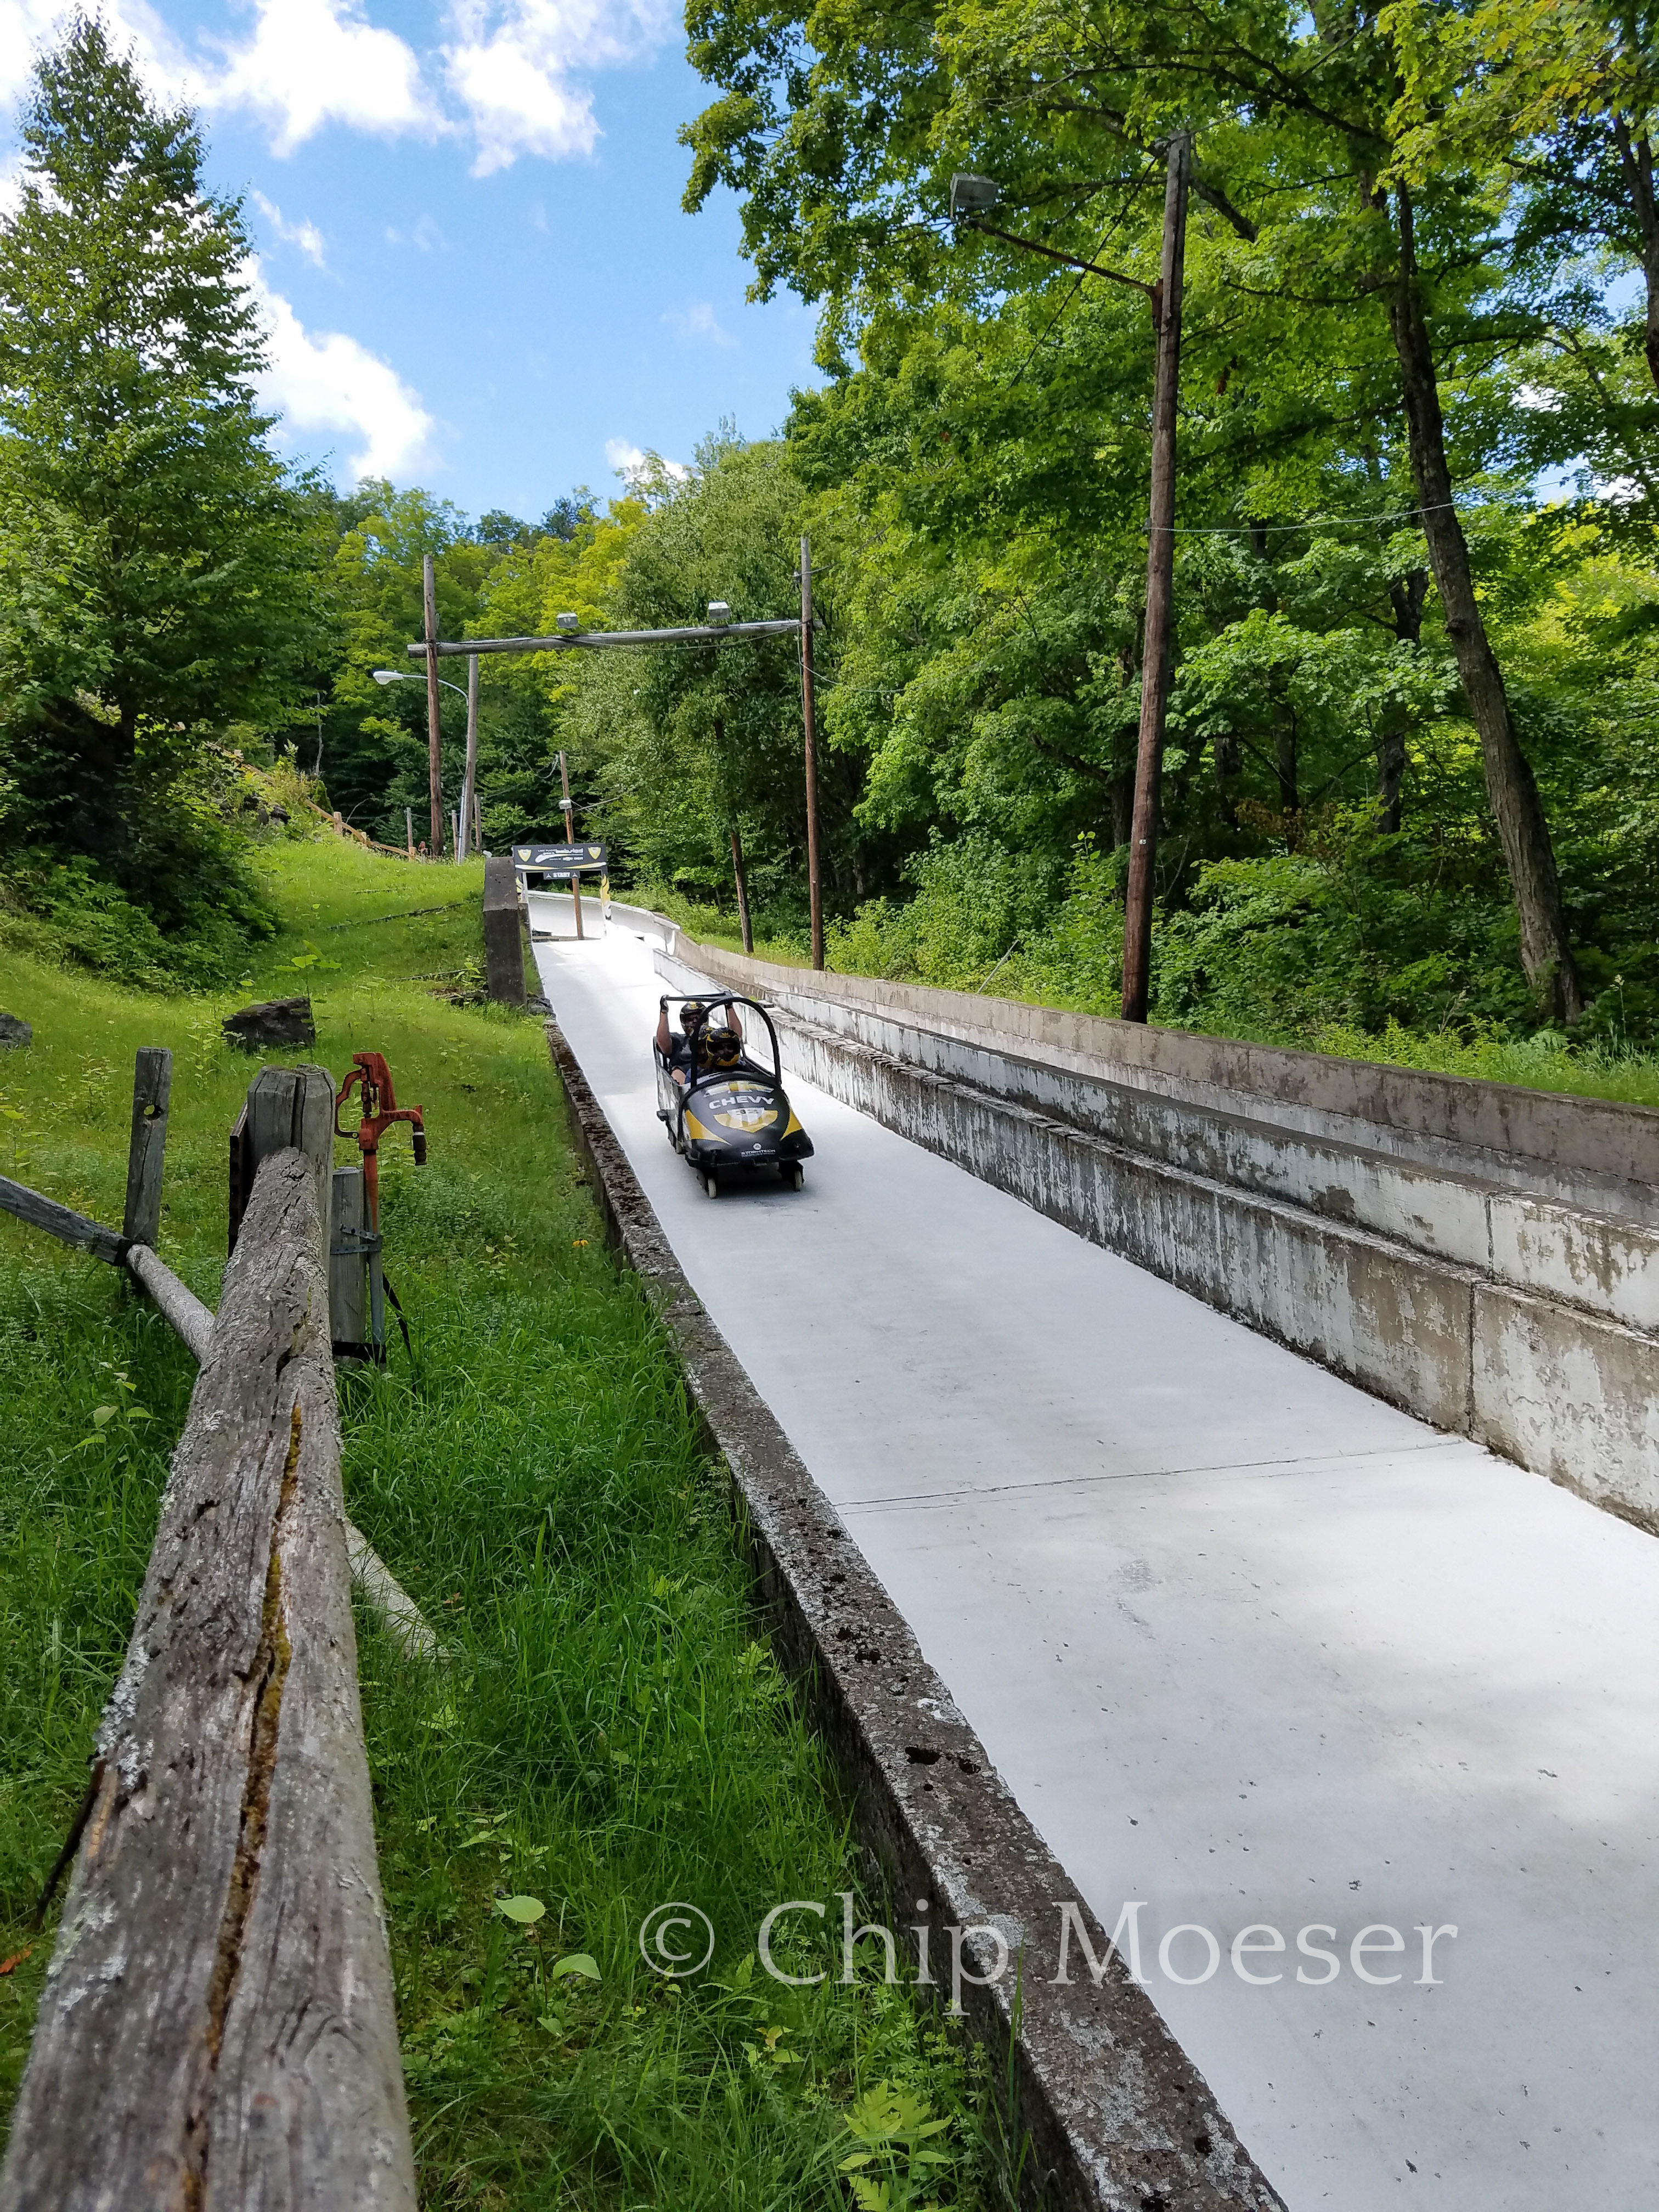 Bobsled track